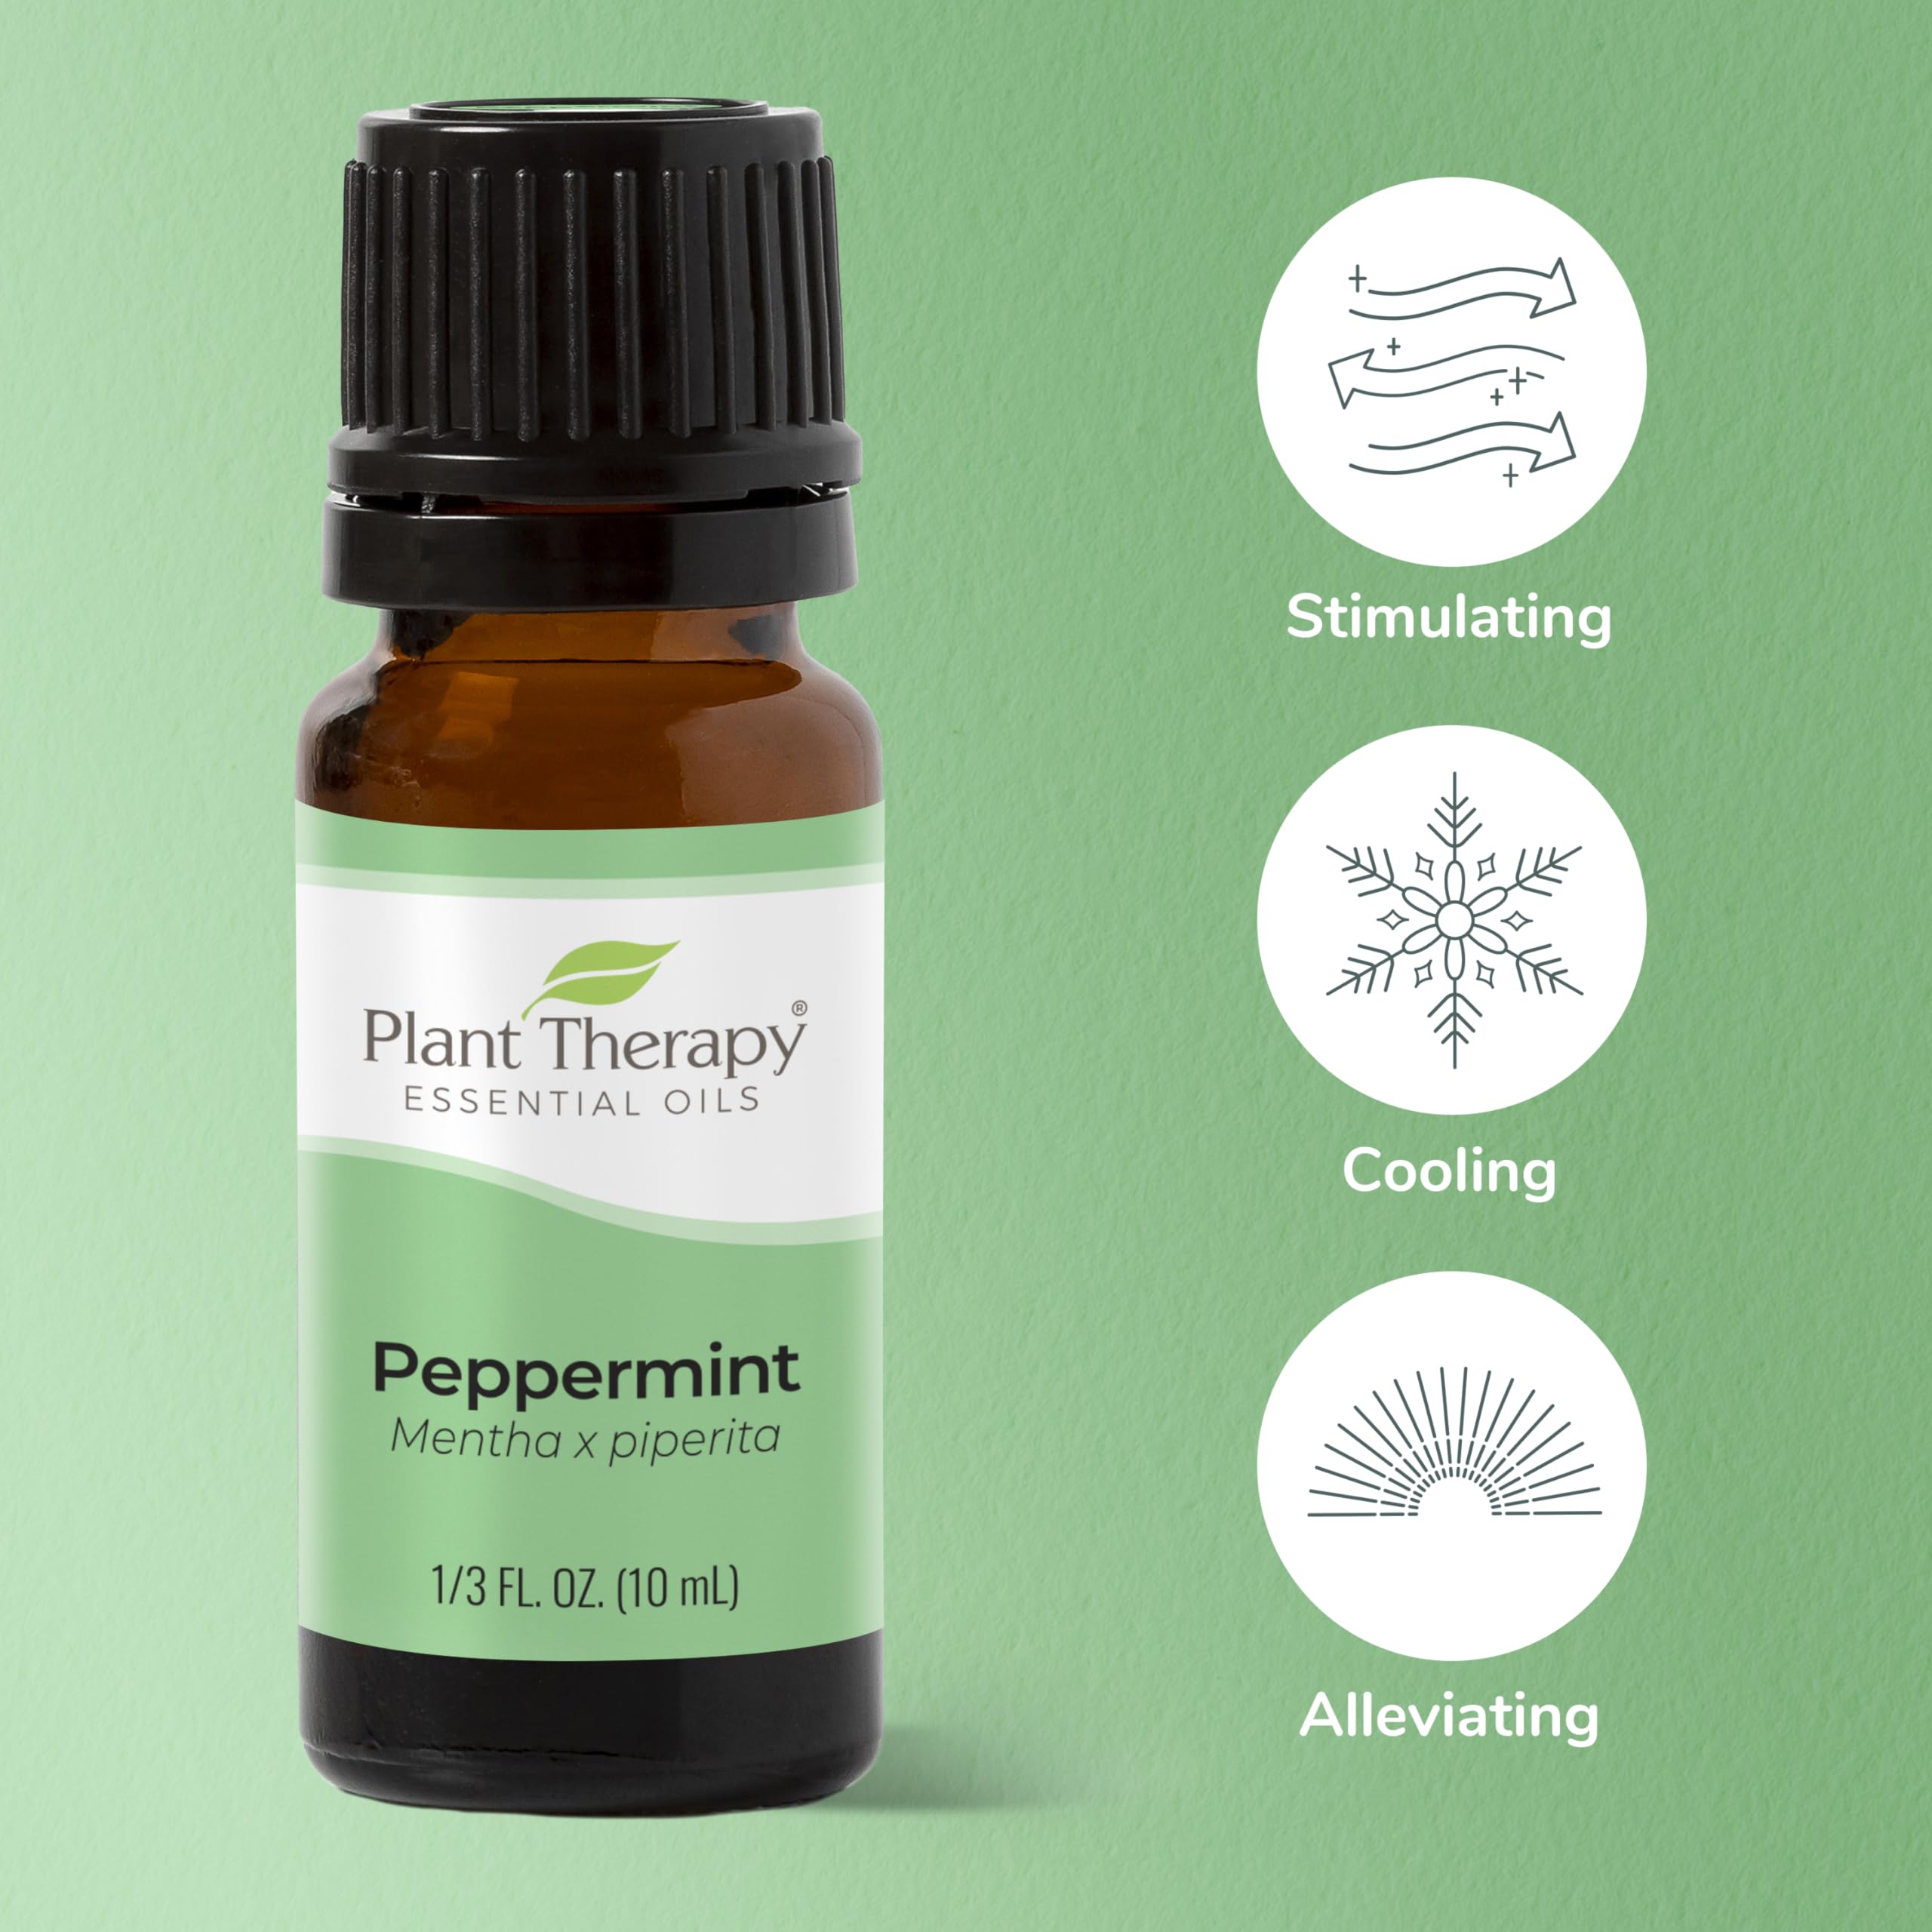 Plant Therapy Peppermint Essential Oil 100% Pure, Undiluted, Natural Aromatherapy, Therapeutic Grade 10 mL (1/3 oz)